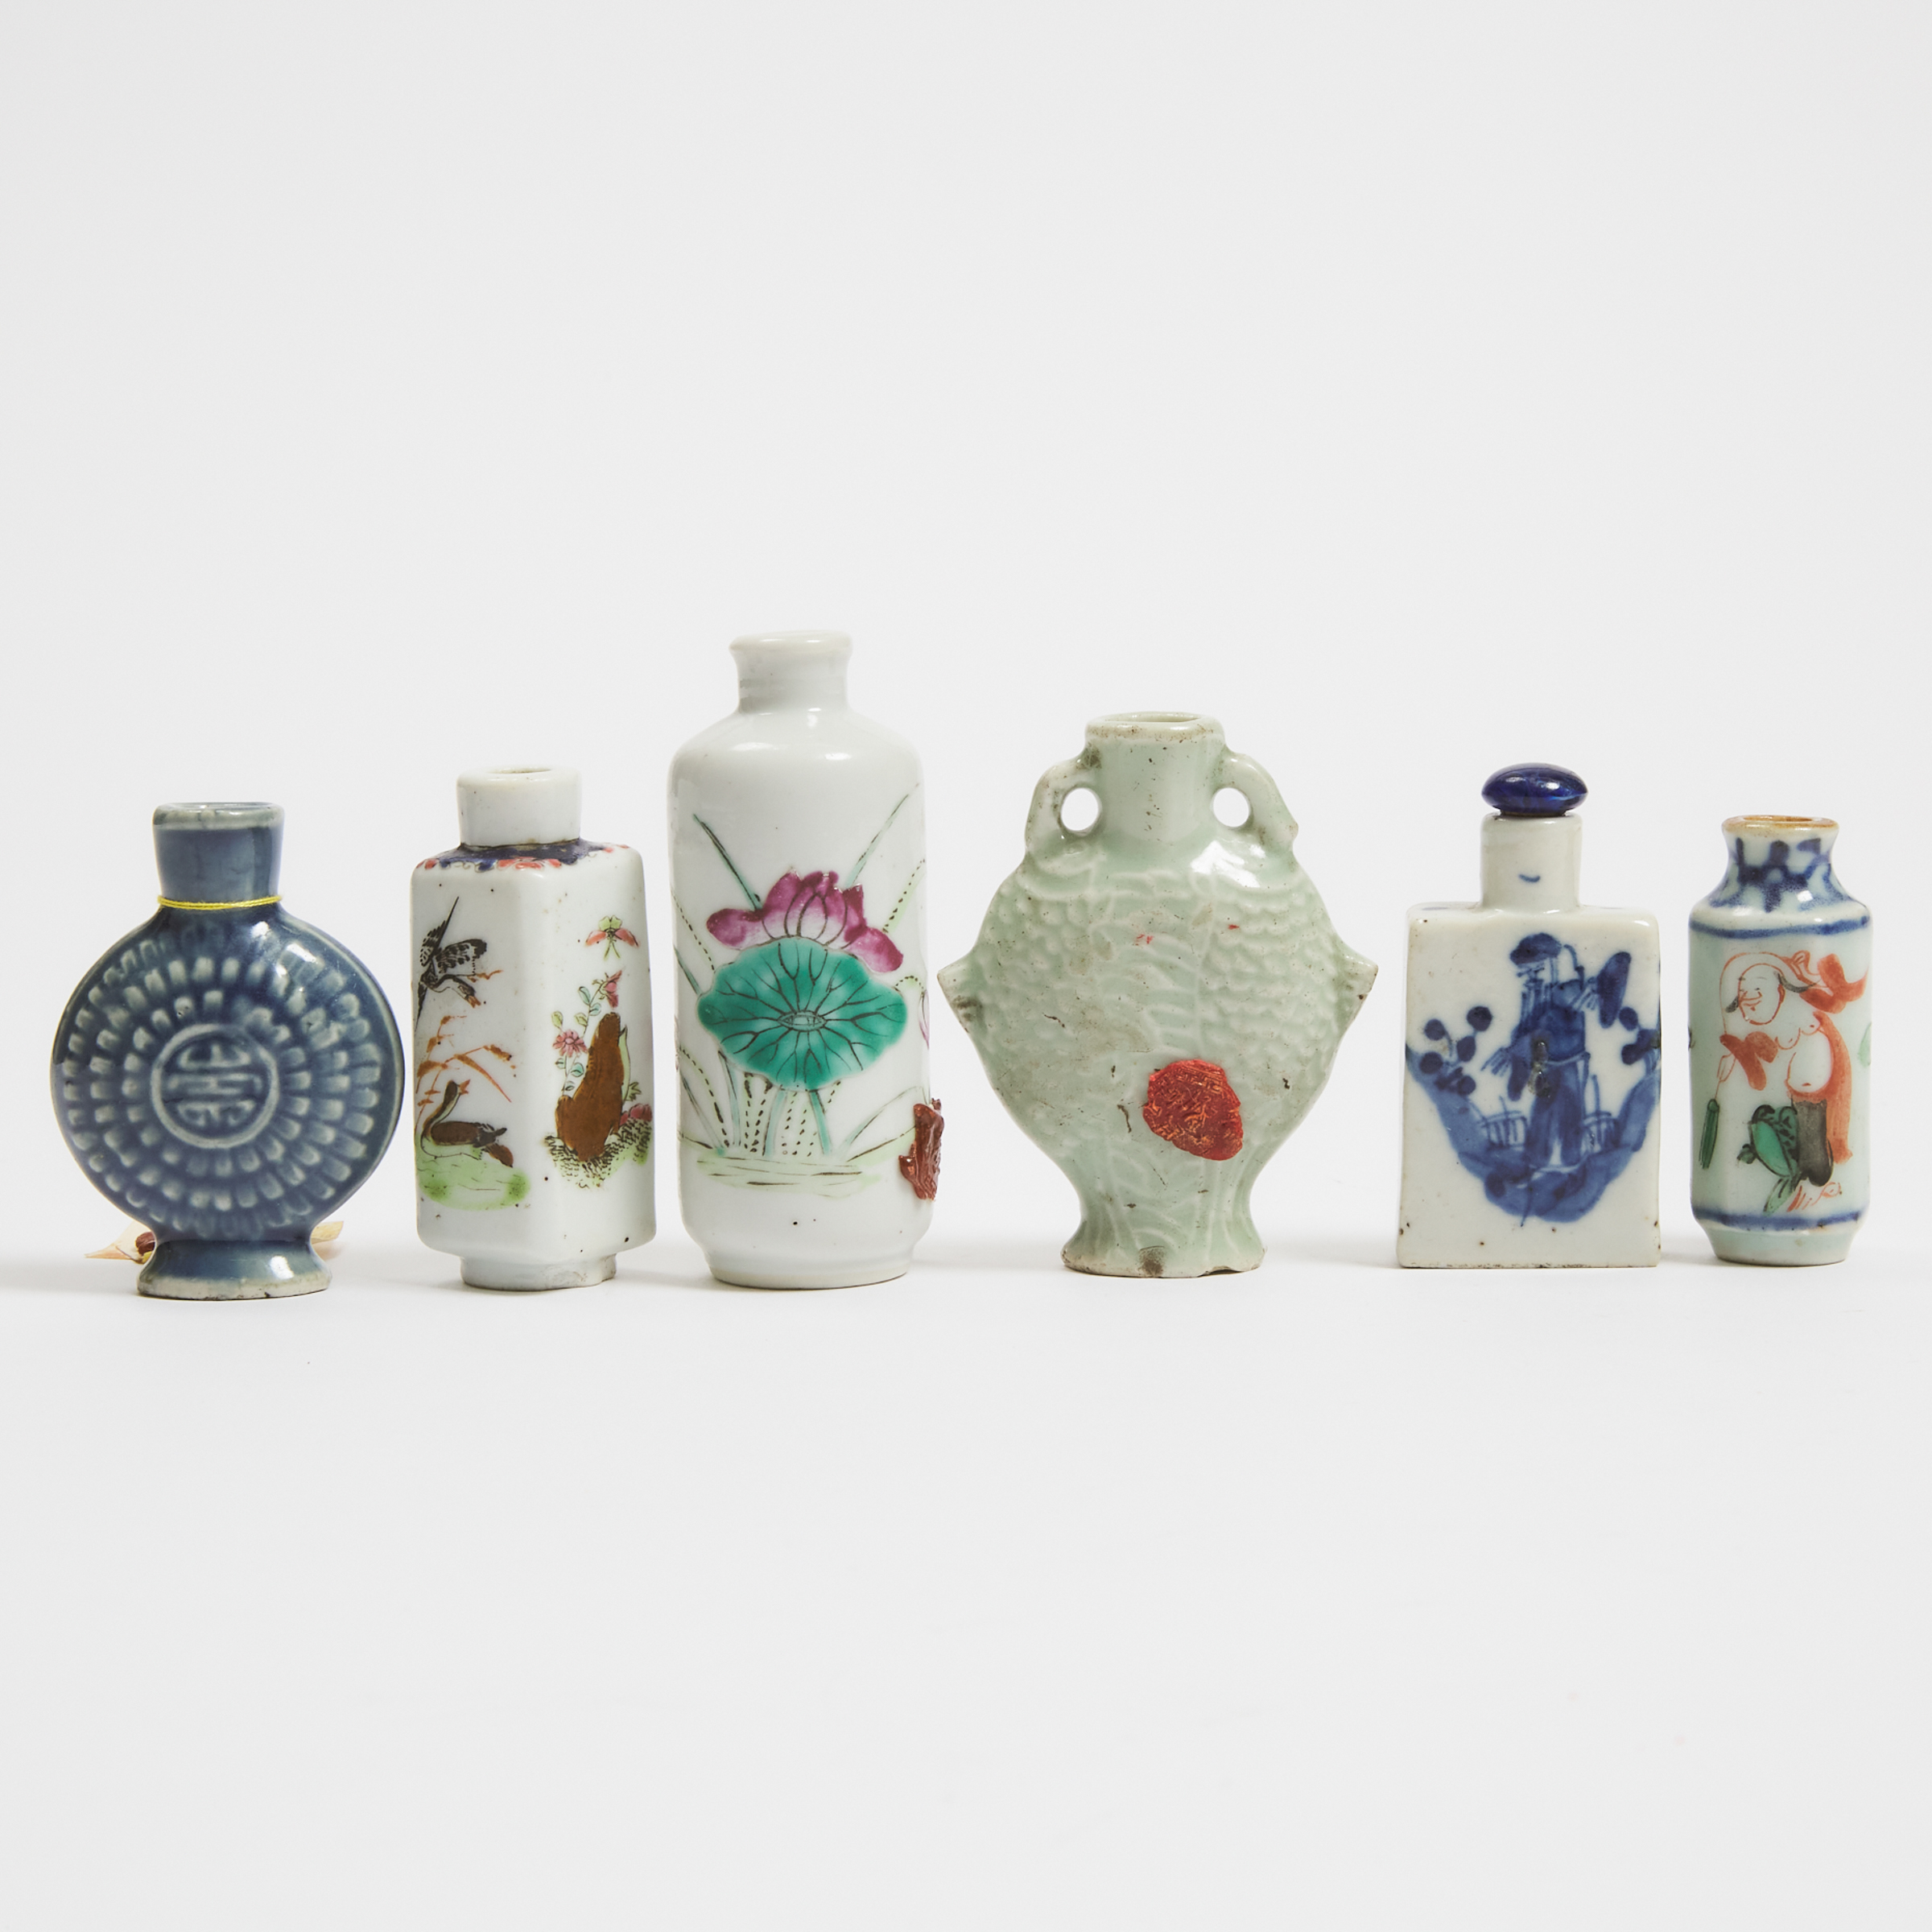 A Group of Six Porcelain Snuff Bottles, 19th Century